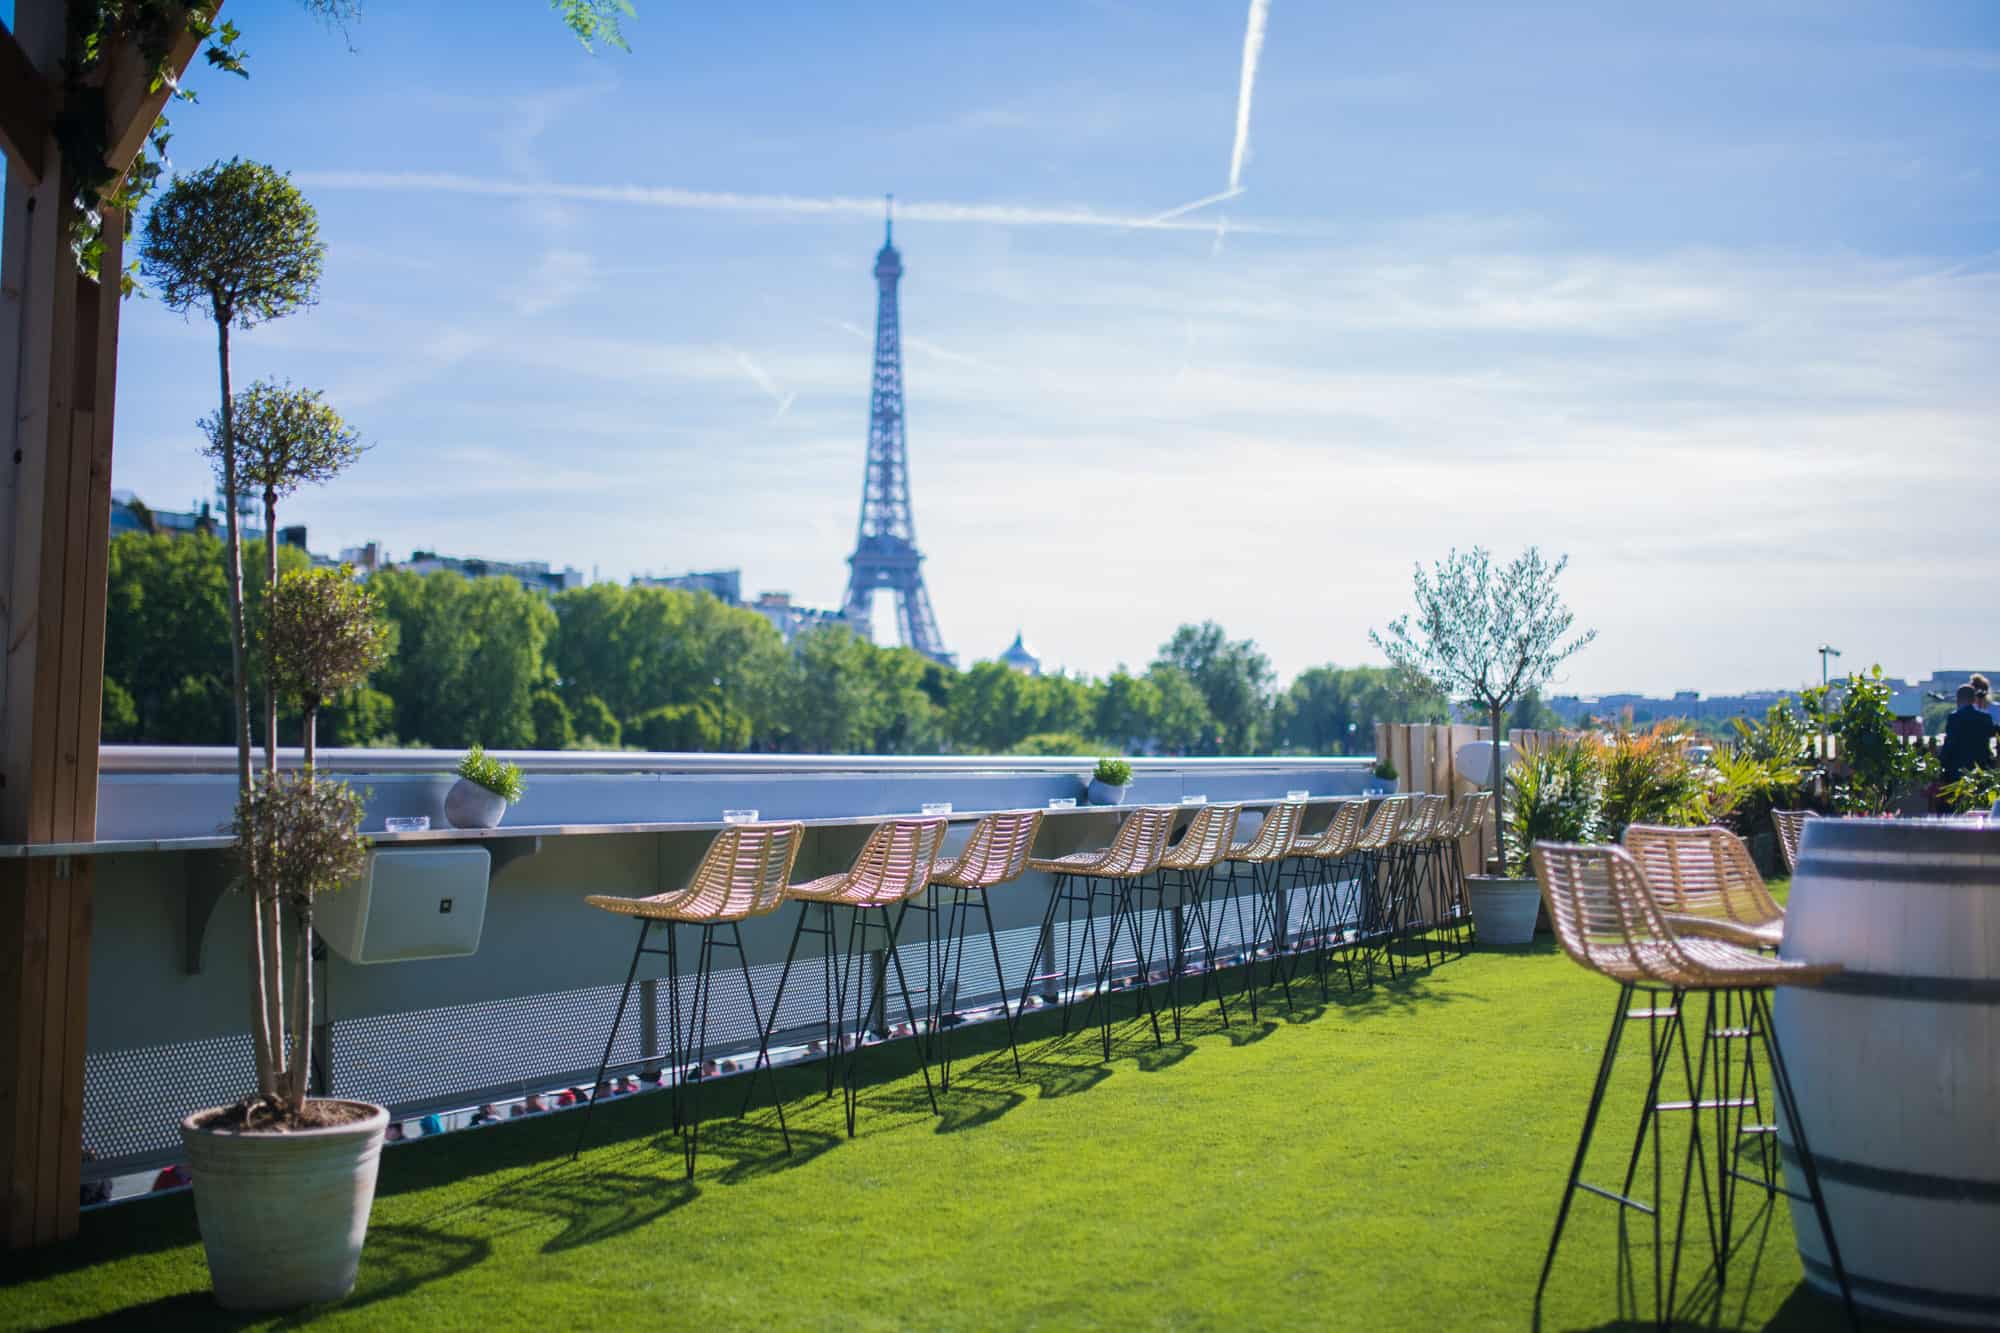 The view of the Eiffel Tower from the top of the barge boat bar Mademoiselle Mouche.